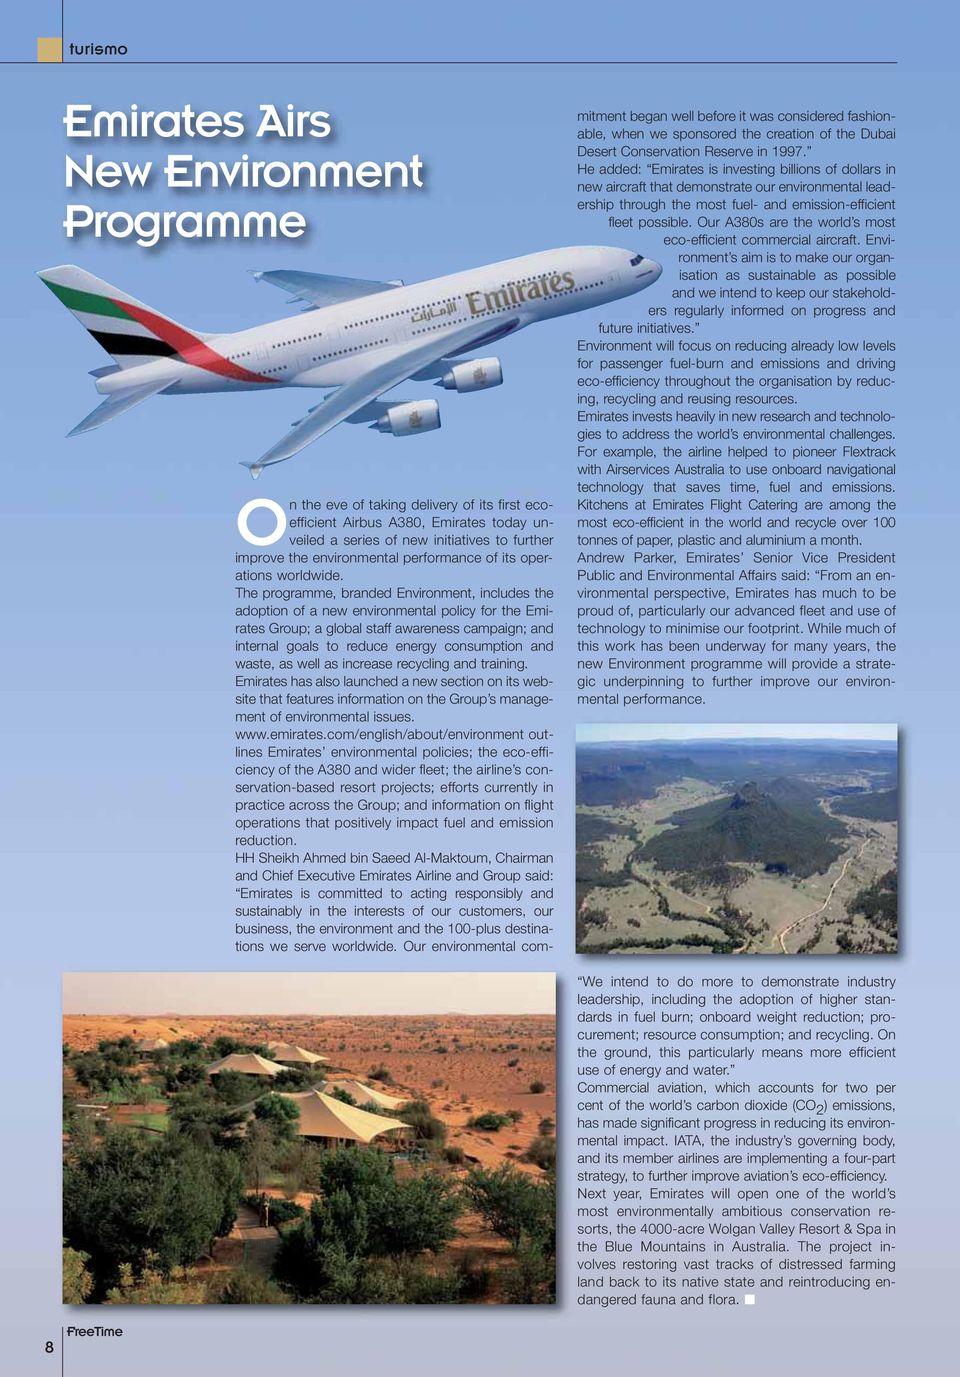 The programme, branded Environment, includes the adoption of a new environmental policy for the Emirates Group; a global staff awareness campaign; and internal goals to reduce energy consumption and